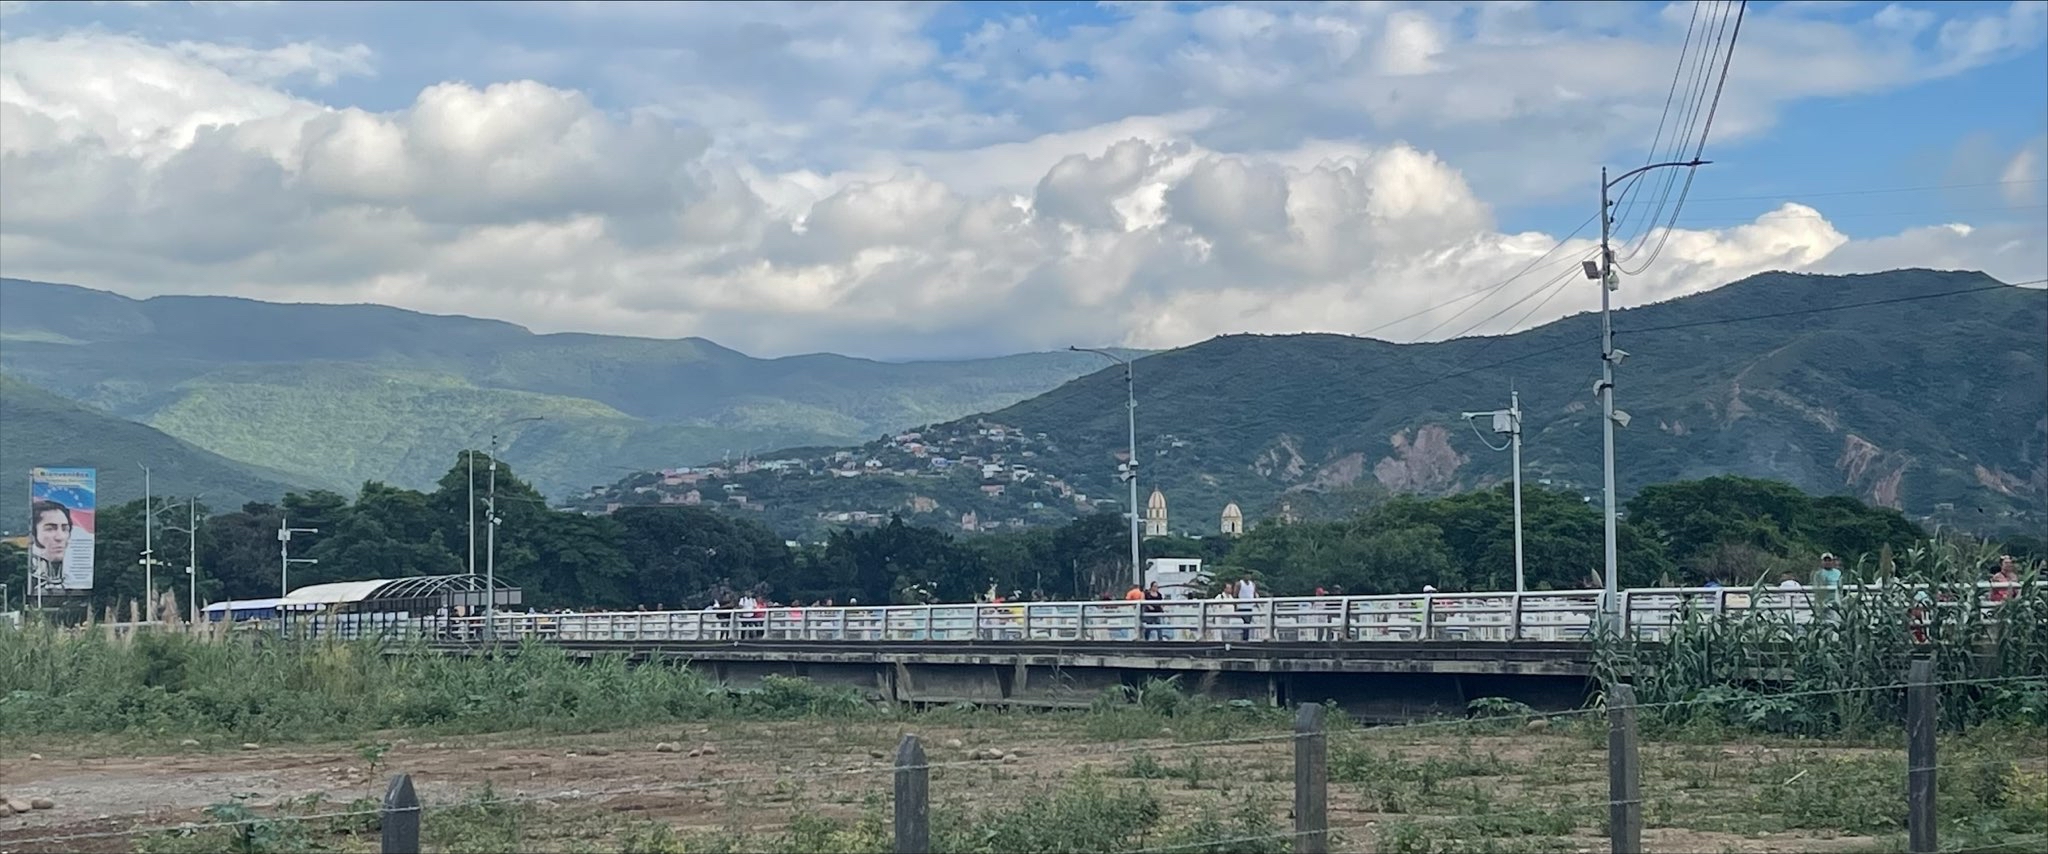 A bridge in Colombia. Refugees and migrants from Venezuela cross this bridge into Colombia to find economic opportunity. Many are rural women.